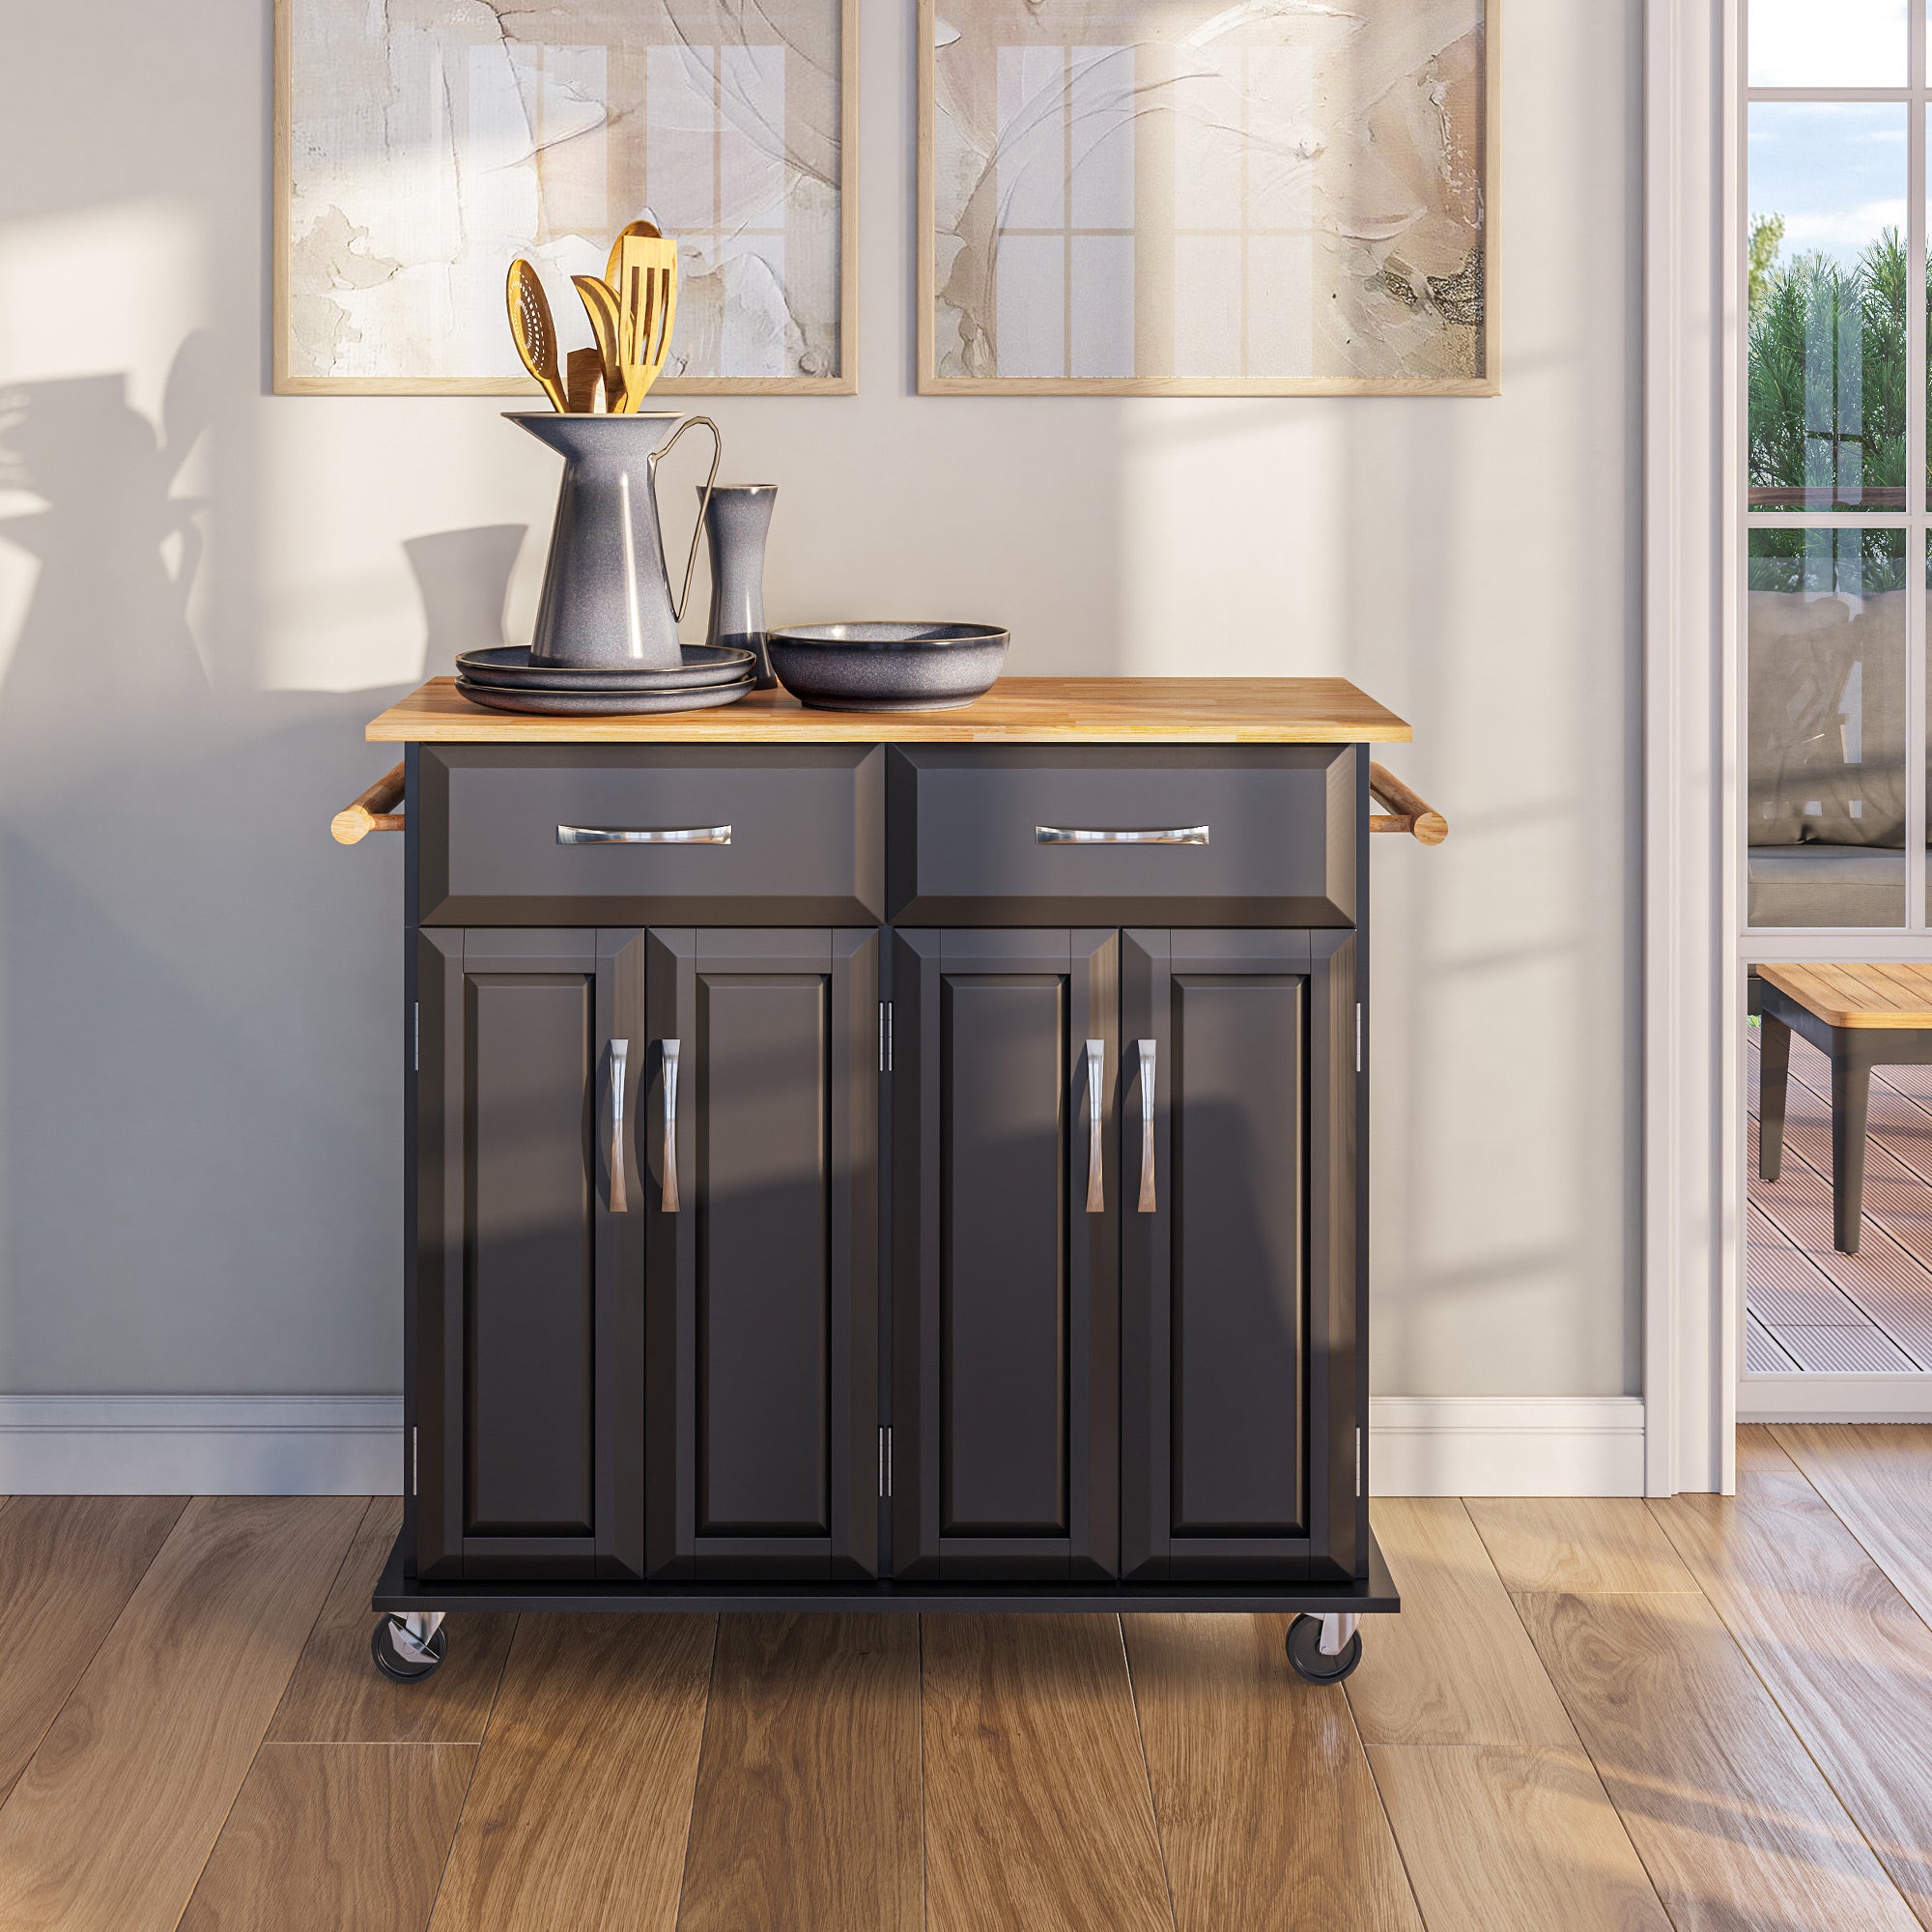 BELLEZE Rolling Kitchen Island Utility Cart with 2 Drawers - Baldy (Black)